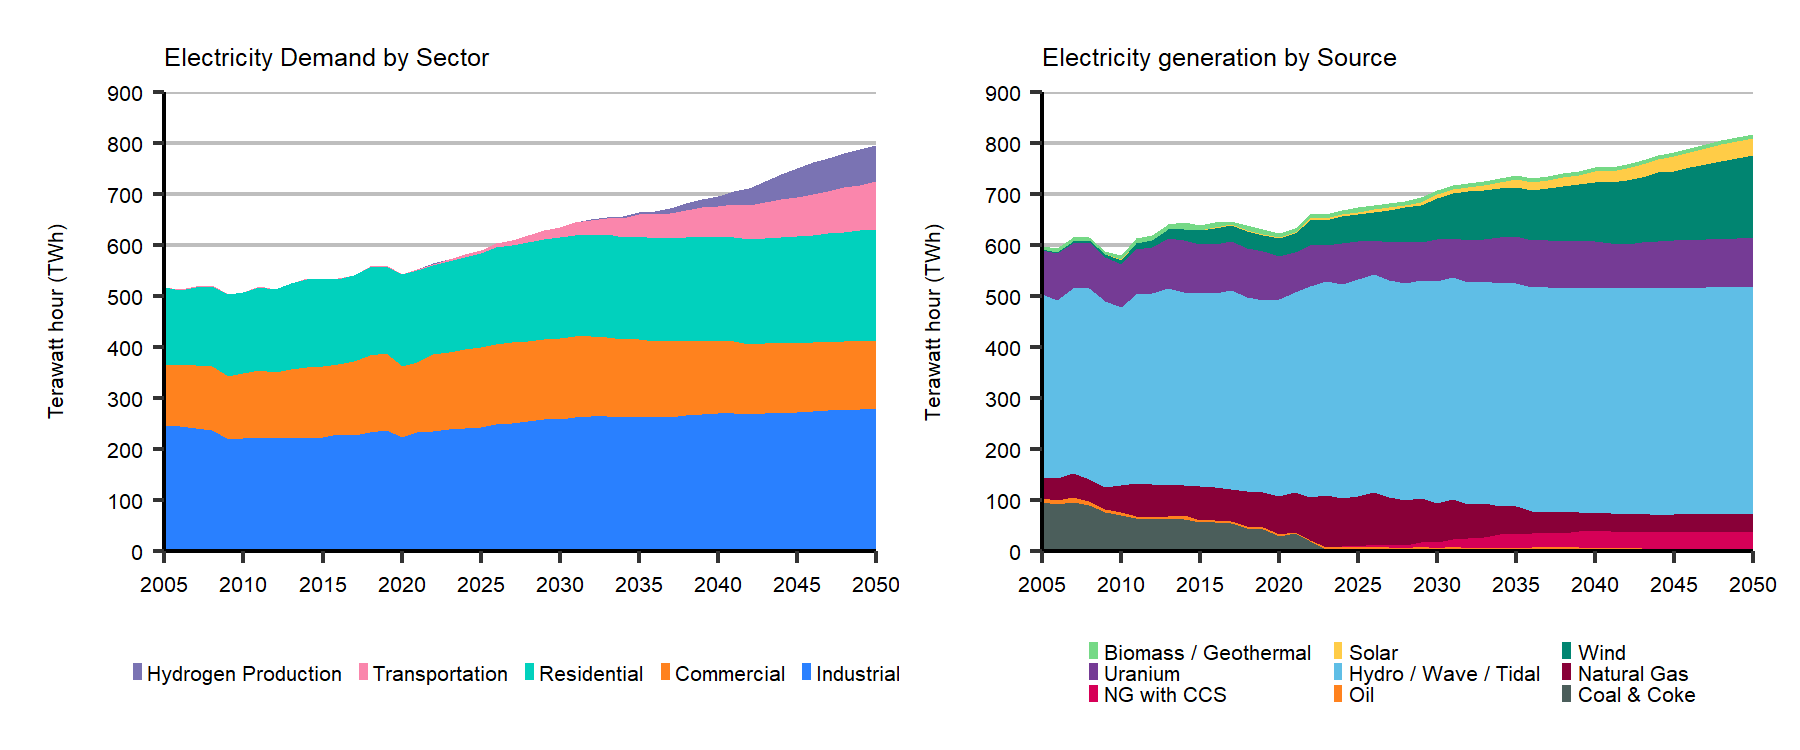 Electricity Demand by Sector, Evolving Policies Scenario and Electricity Generation by Source, Evolving Policies Scenario